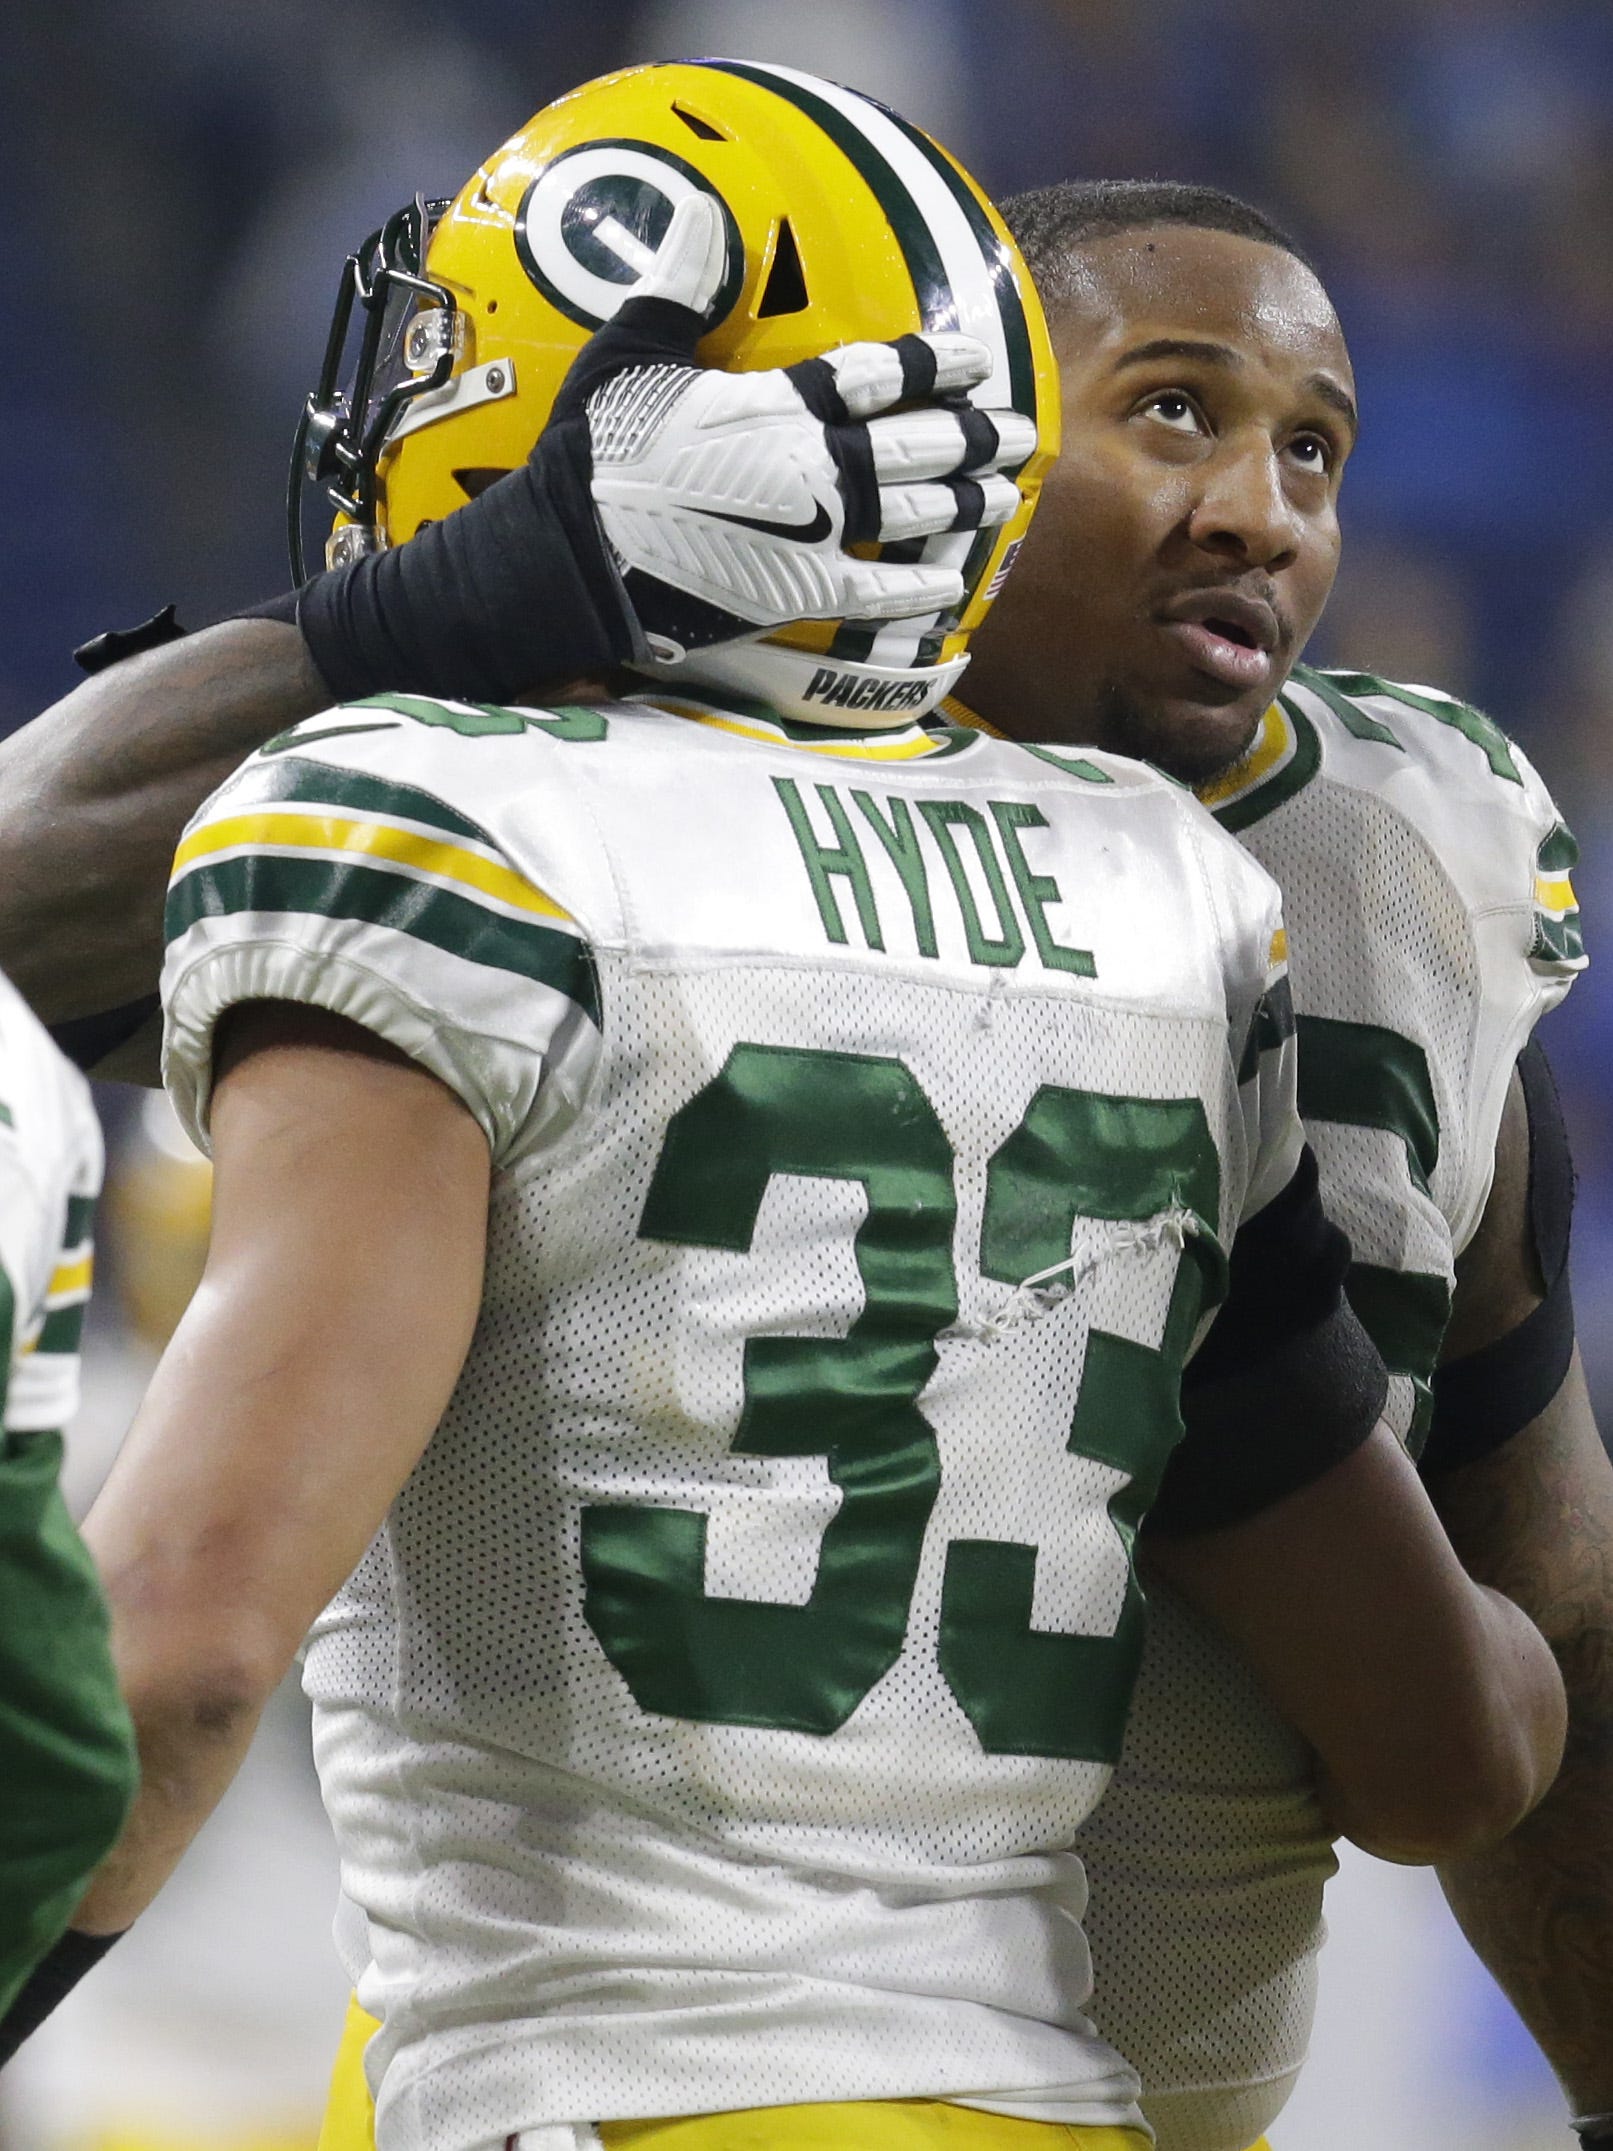 Green Bay Packers defensive end Mike Daniels (76) embraces strong safety Micah Hyde (33) after Hyde made an interception in the waning moments of the fourth quarter of their game on Jan. 1, 2017, at Ford Field in Detroit.